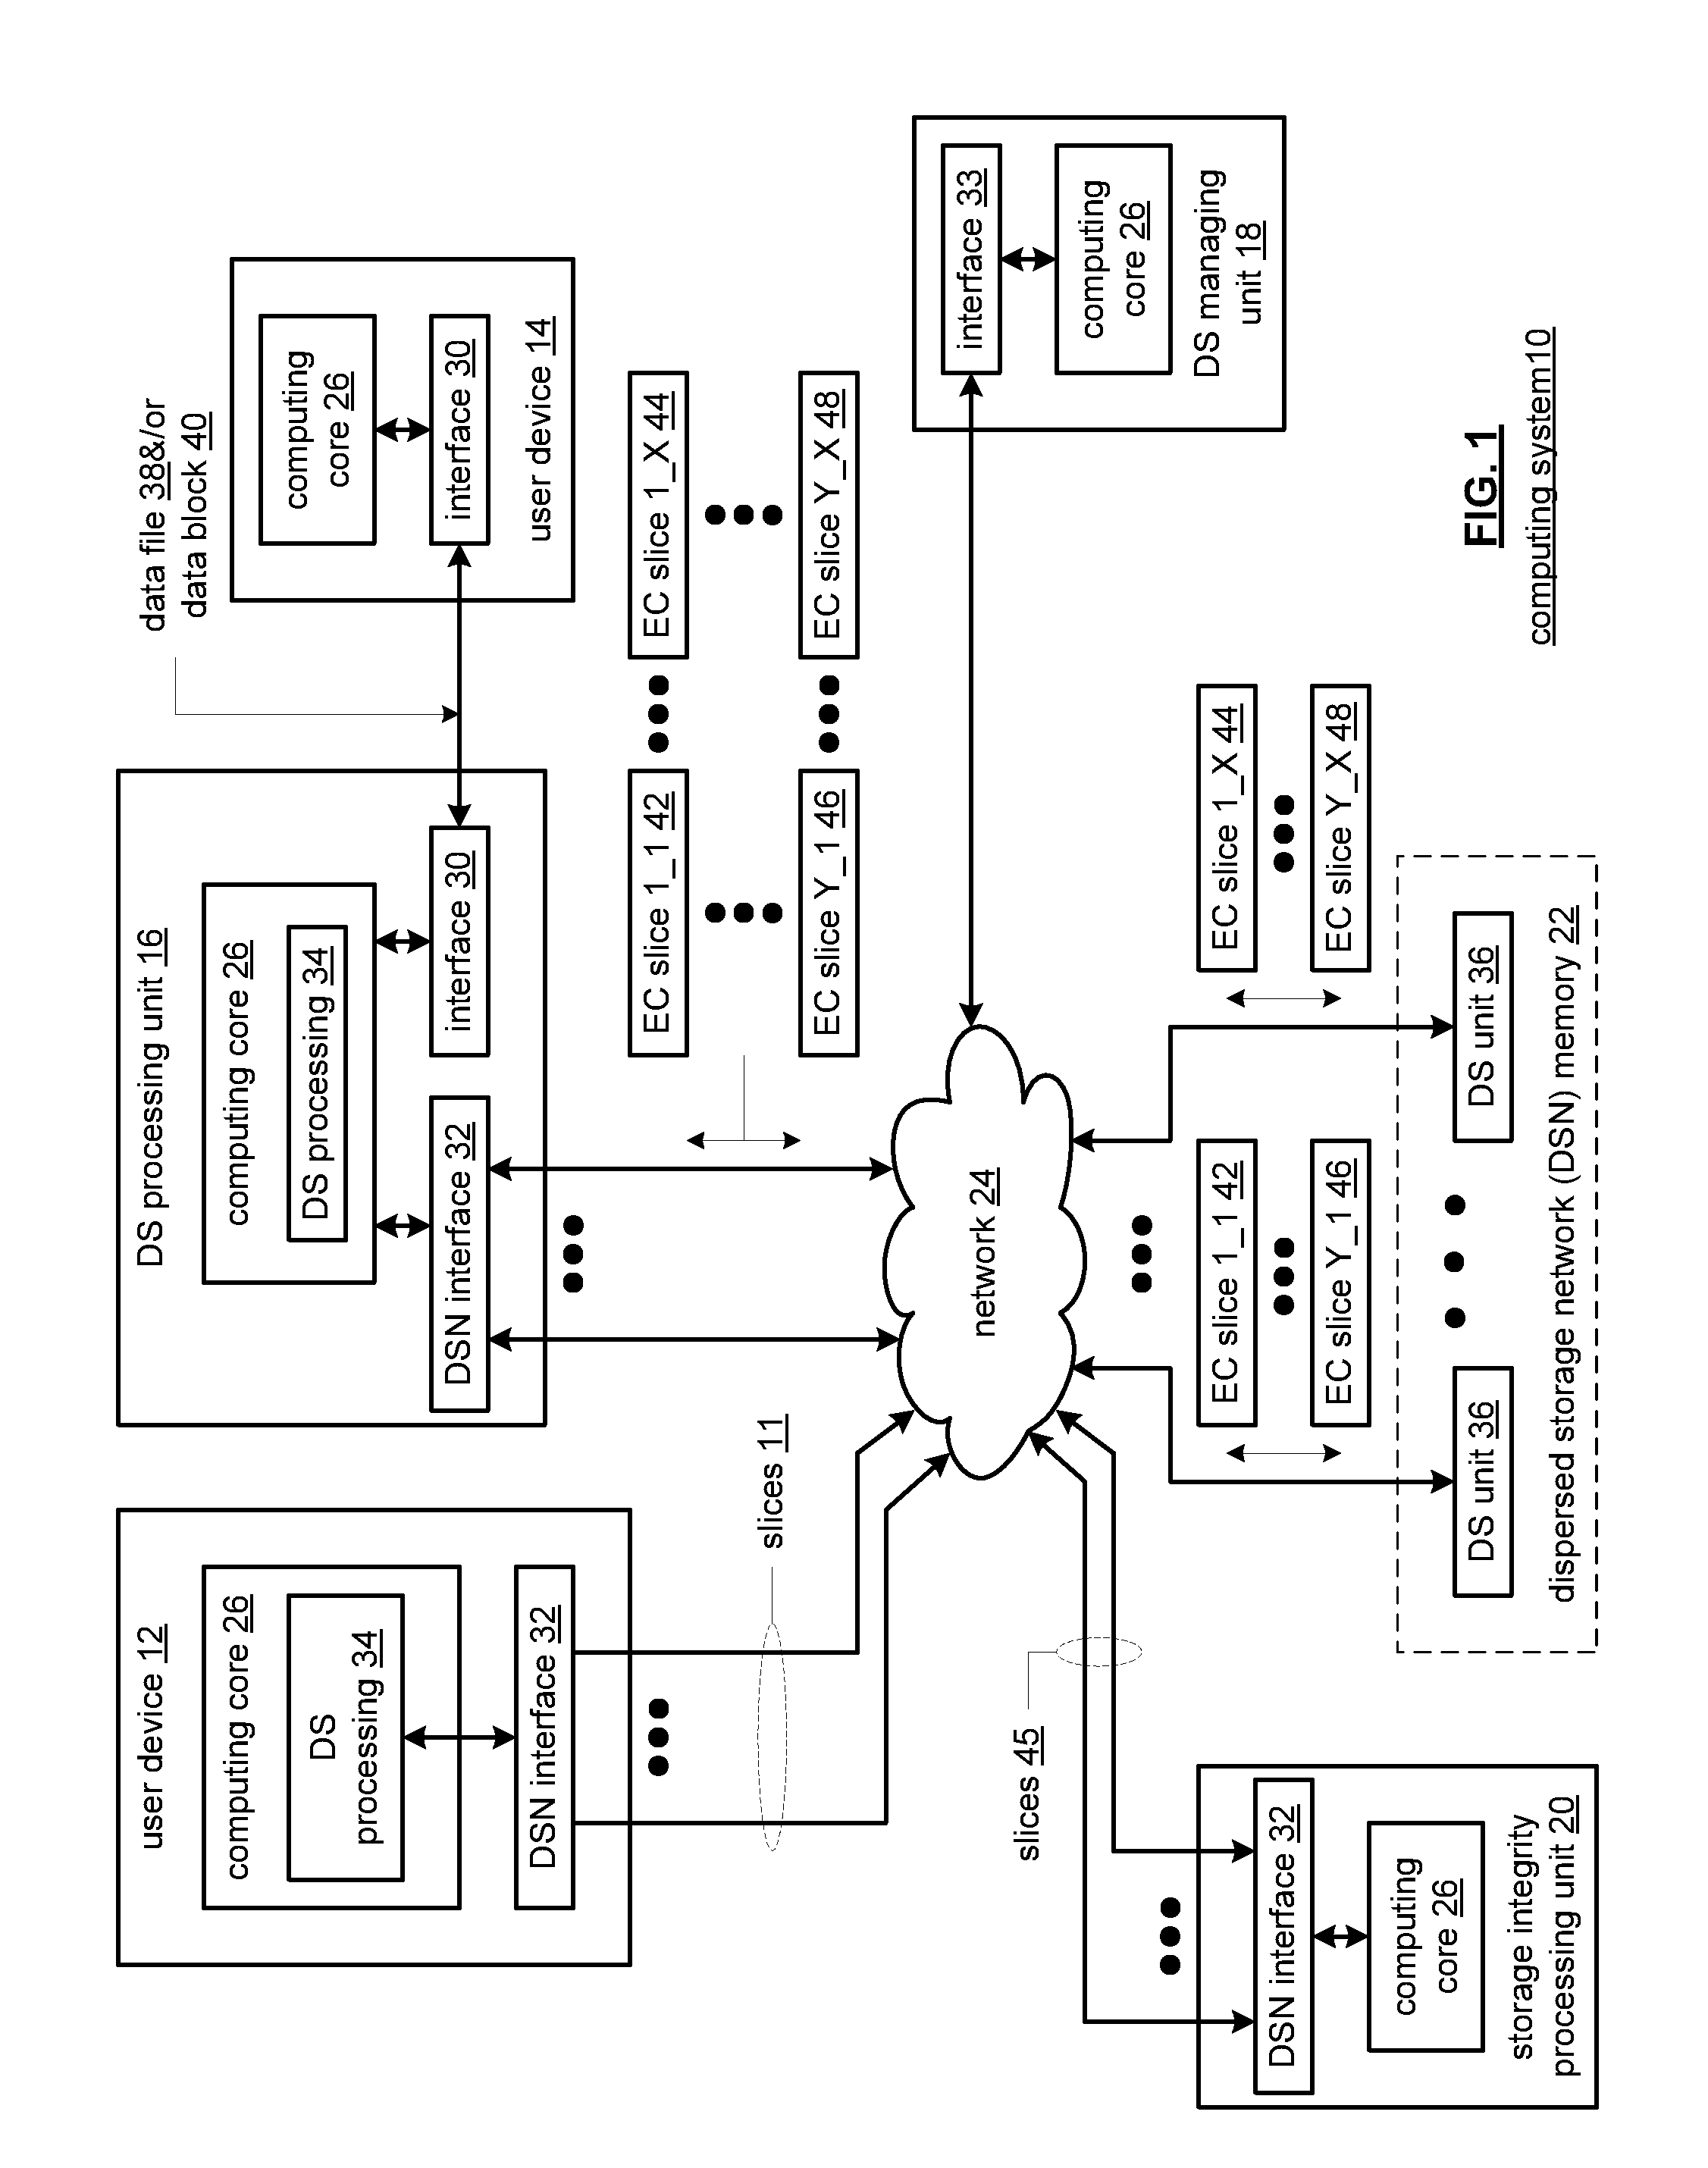 Router-based dispersed storage network method and apparatus